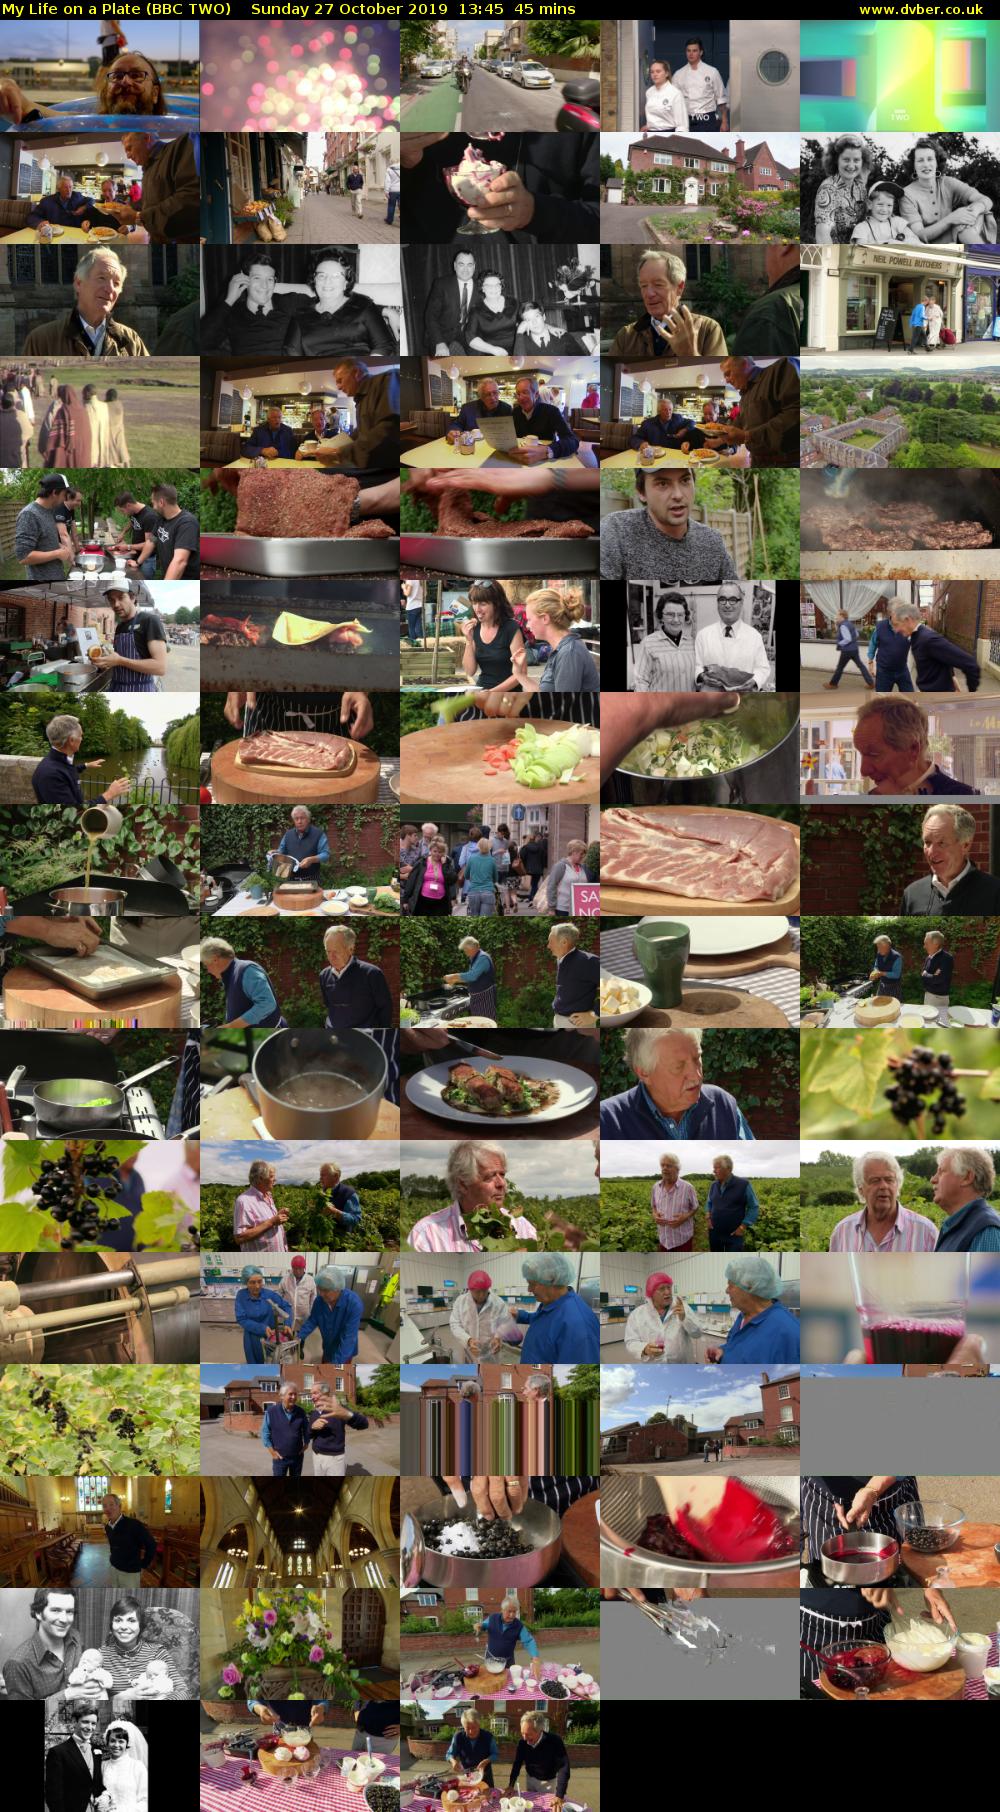 My Life on a Plate (BBC TWO) Sunday 27 October 2019 13:45 - 14:30